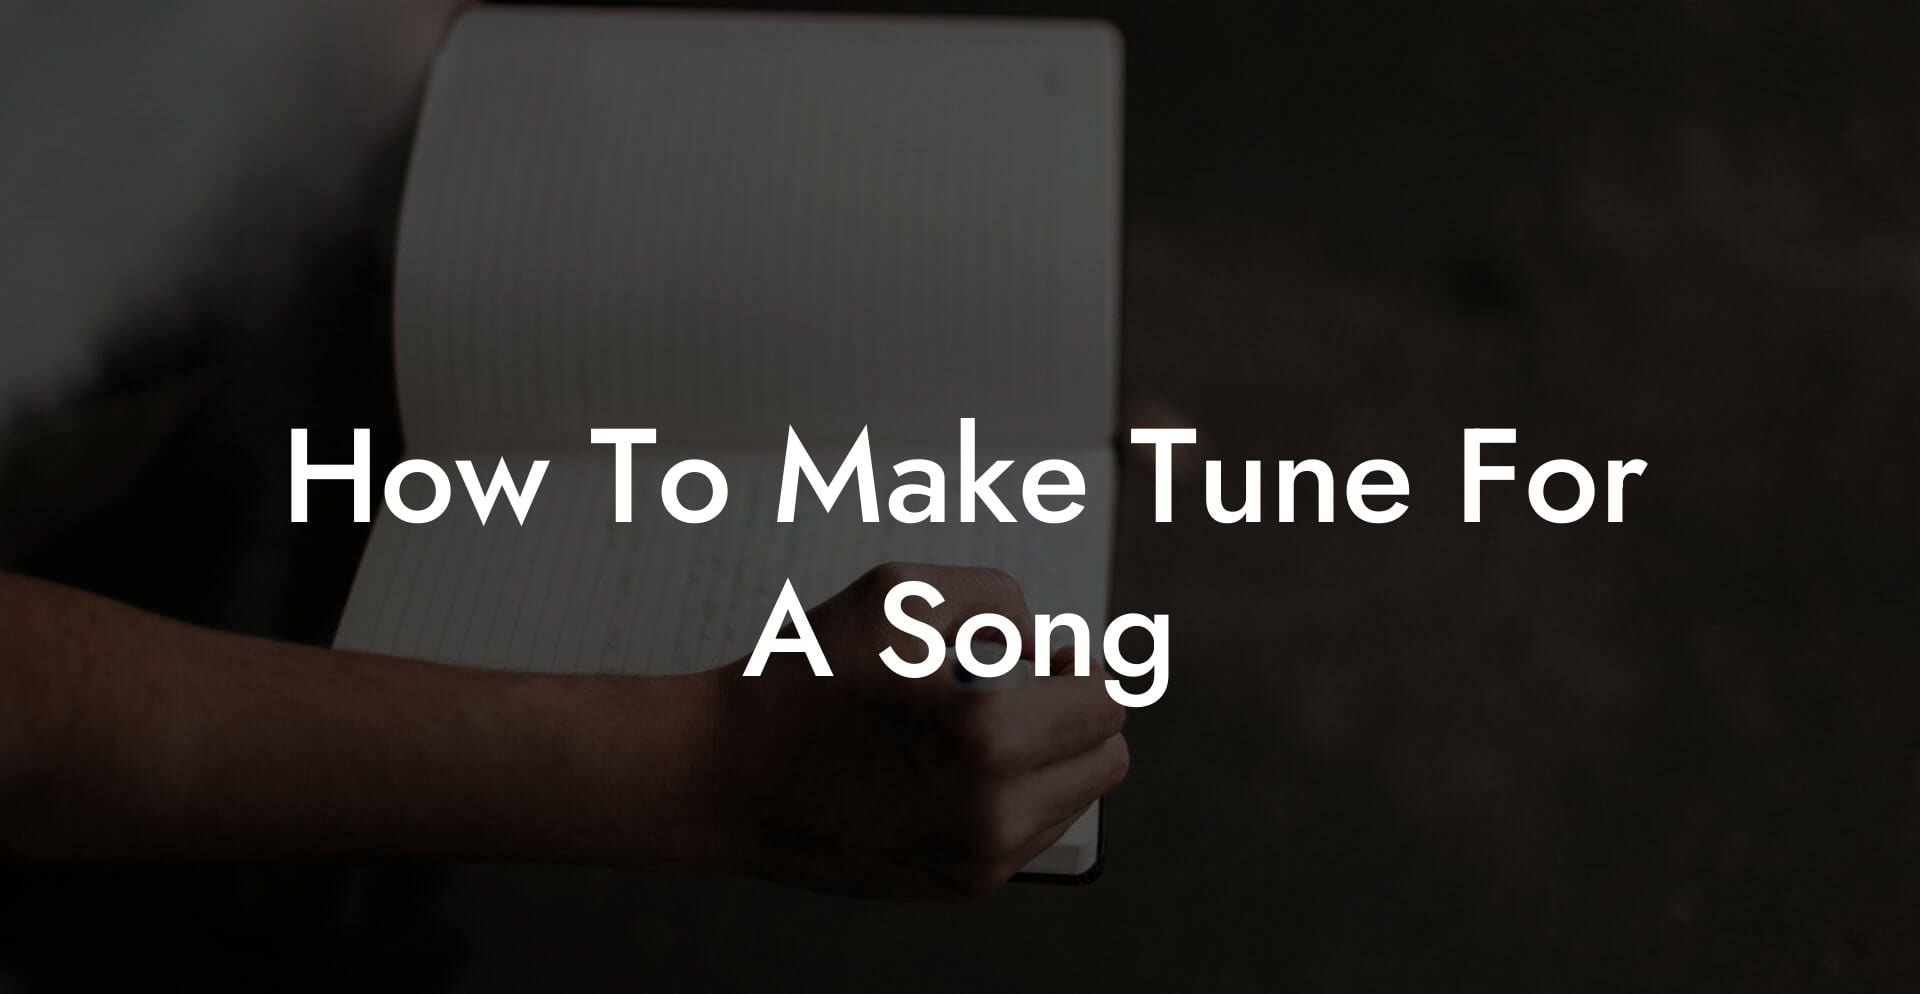 how to make tune for a song lyric assistant